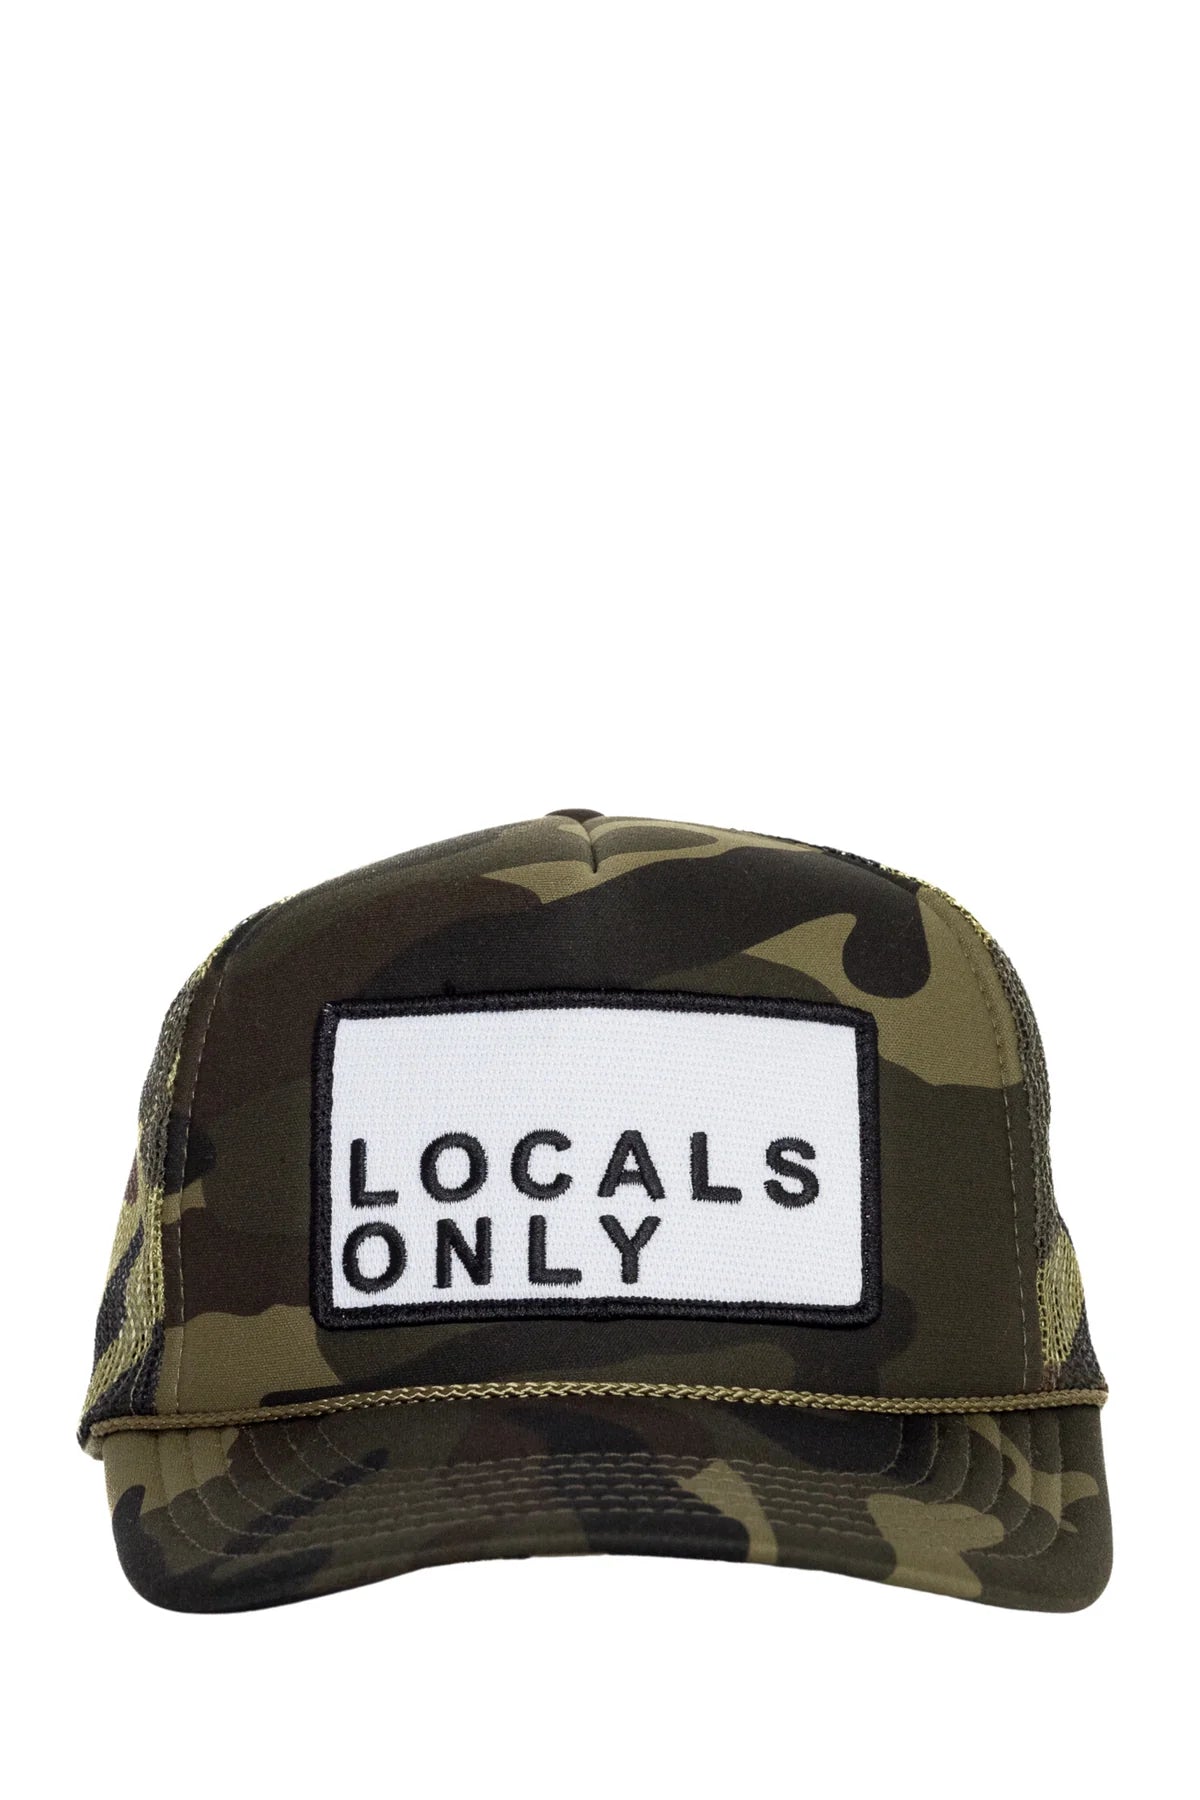 Camo Locals Only Trucker Hat by Friday Feelin